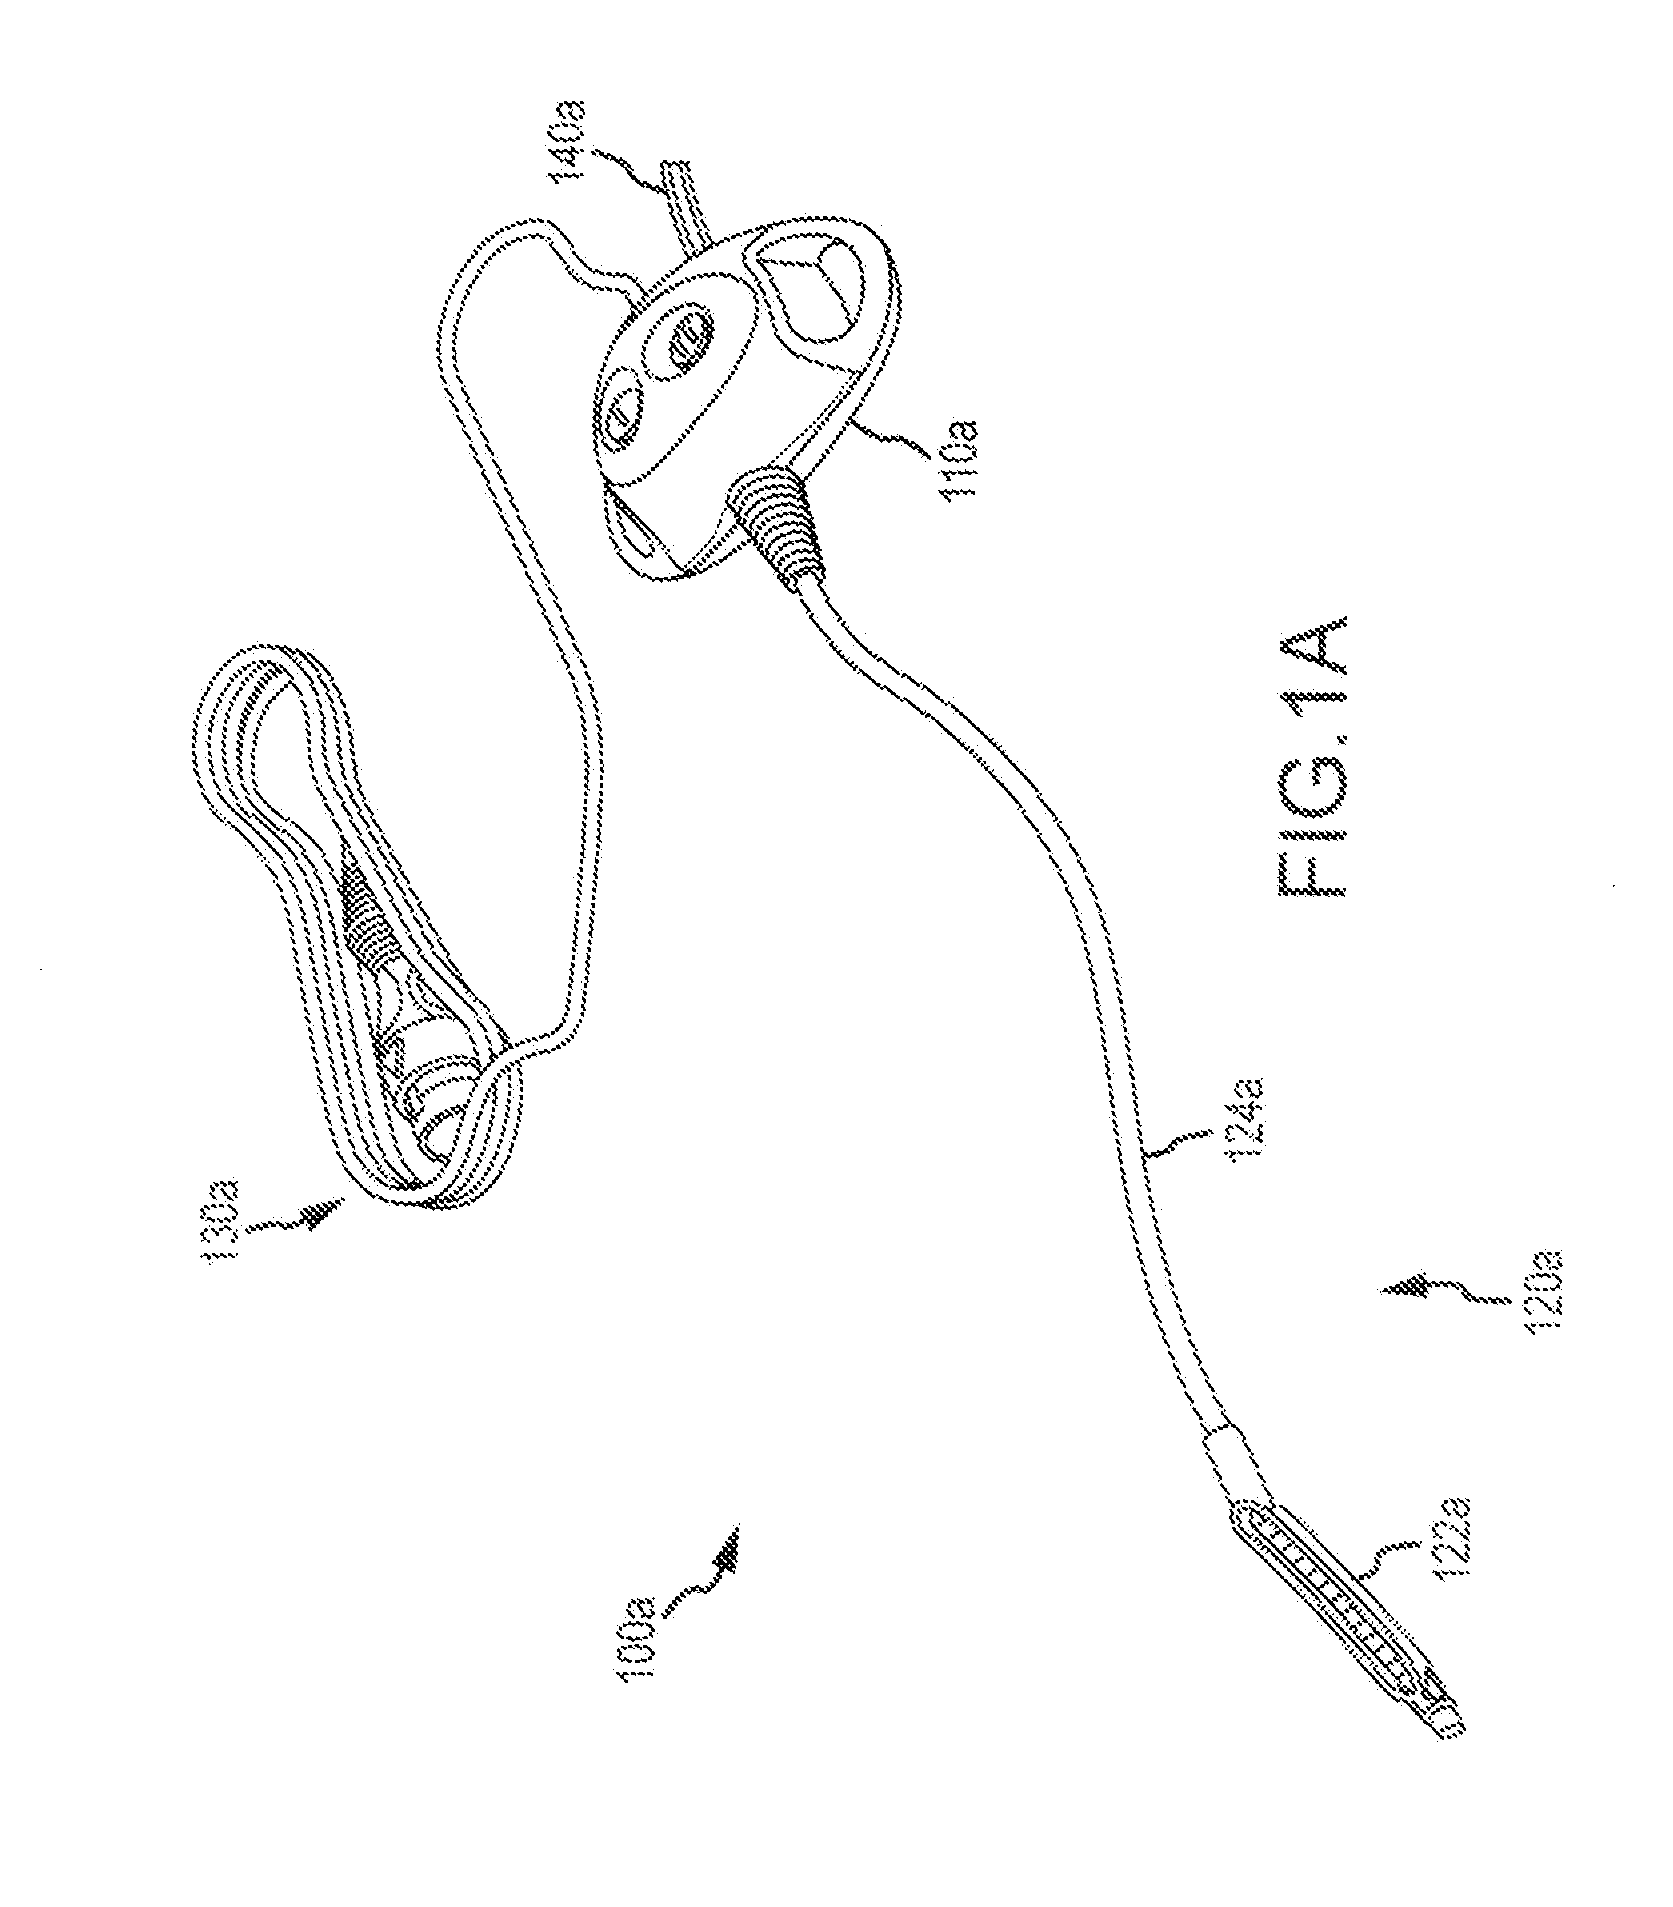 Stabilized ablation systems and methods